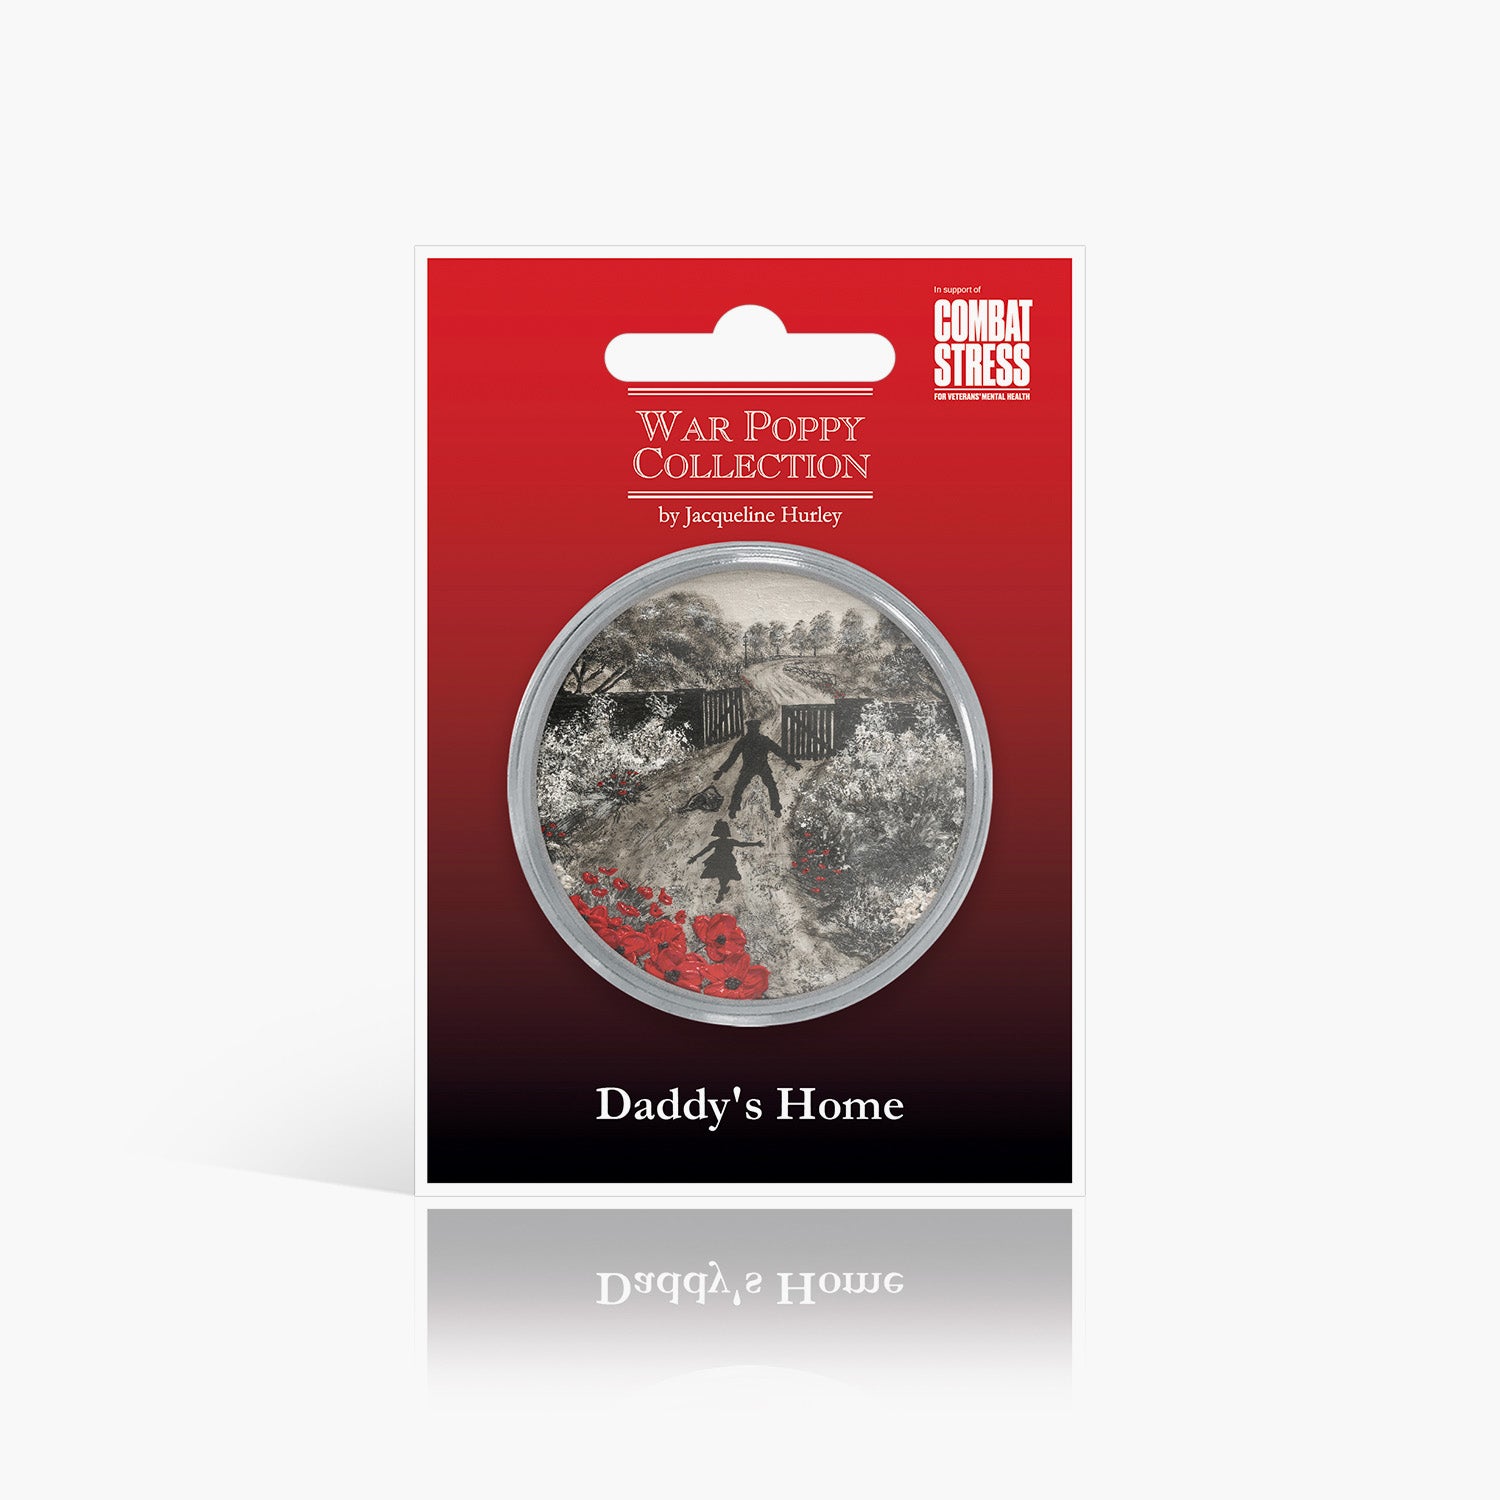 Daddy's Home Silver-Plated Commemorative